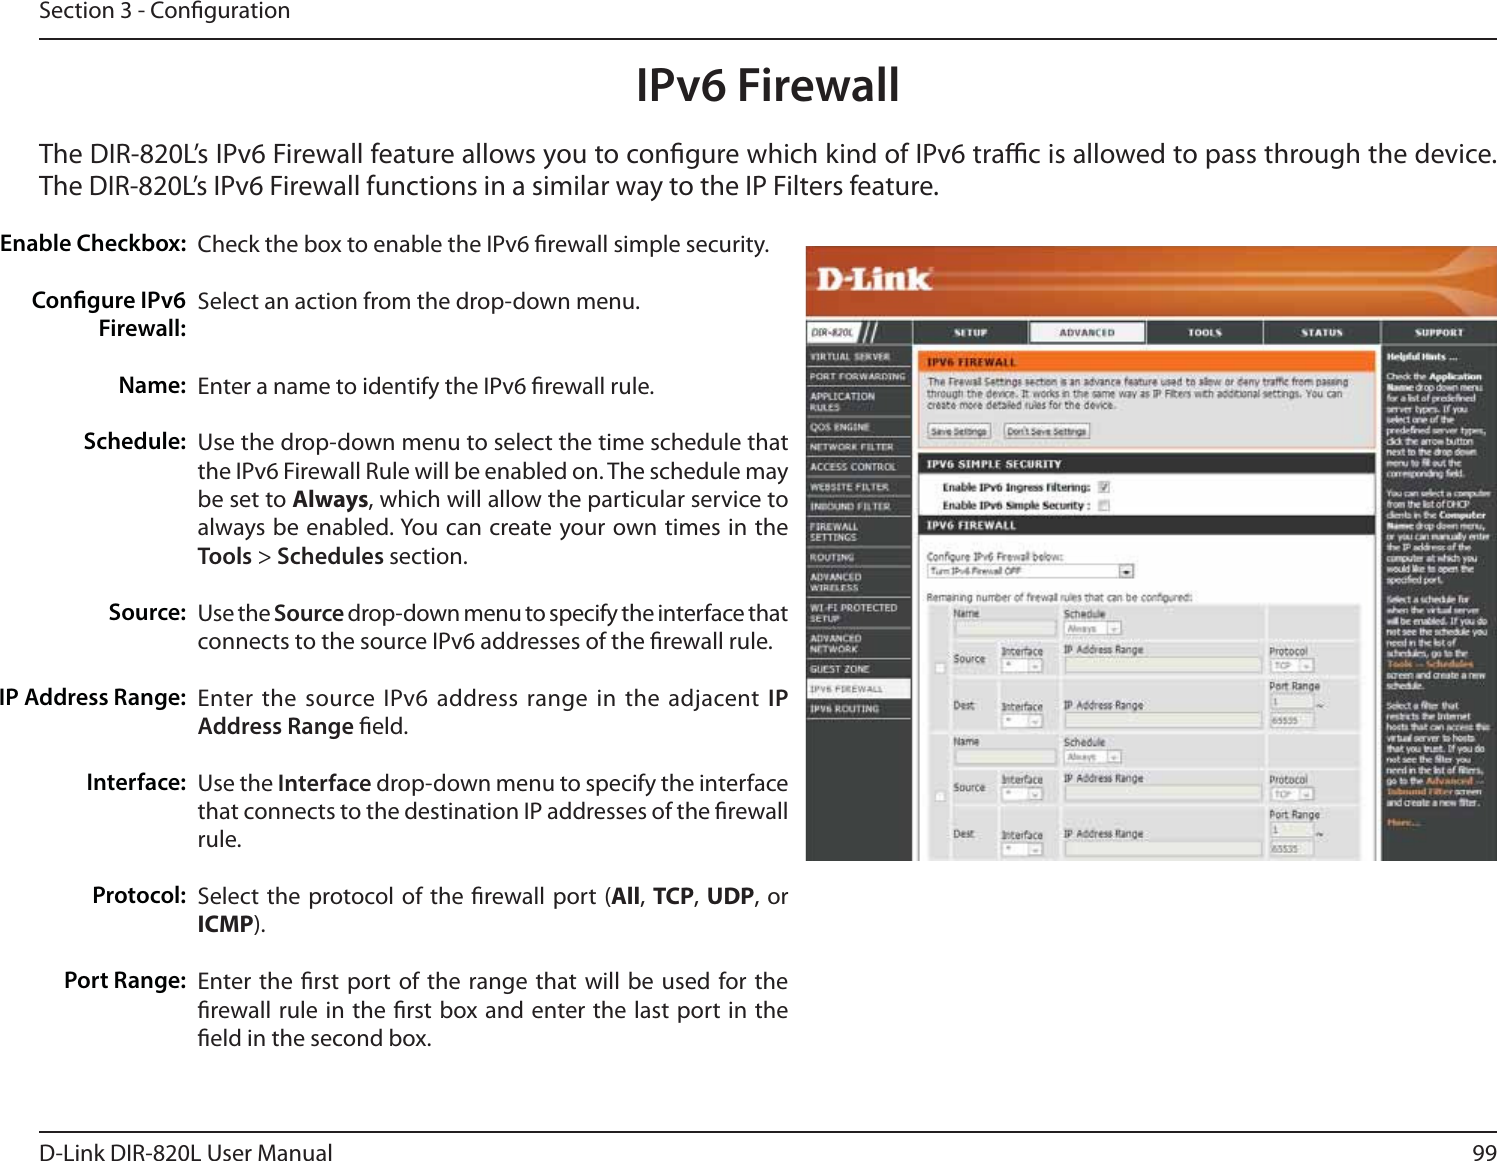 99D-Link DIR-820L User ManualSection 3 - CongurationIPv6 FirewallThe DIR-820L’s IPv6 Firewall feature allows you to congure which kind of IPv6 trac is allowed to pass through the device. The DIR-820L’s IPv6 Firewall functions in a similar way to the IP Filters feature.Check the box to enable the IPv6 rewall simple security.Select an action from the drop-down menu.Enter a name to identify the IPv6 rewall rule.Use the drop-down menu to select the time schedule that the IPv6 Firewall Rule will be enabled on. The schedule may be set to Always, which will allow the particular service to always be enabled. You can create your own times in the Tools &gt; Schedules section. Use the Source drop-down menu to specify the interface that connects to the source IPv6 addresses of the rewall rule. Enter the source IPv6 address range in the adjacent IP Address Range eld.Use the Interface drop-down menu to specify the interface that connects to the destination IP addresses of the rewall rule. Select the protocol of the rewall port (All, TCP, UDP, or ICMP).Enter the rst port of the range that will be used for the rewall rule in the rst box and enter the last port in the eld in the second box.Enable Checkbox:Congure IPv6 Firewall:Name:Schedule:Source:IP Address Range:Interface:   Protocol:Port Range: